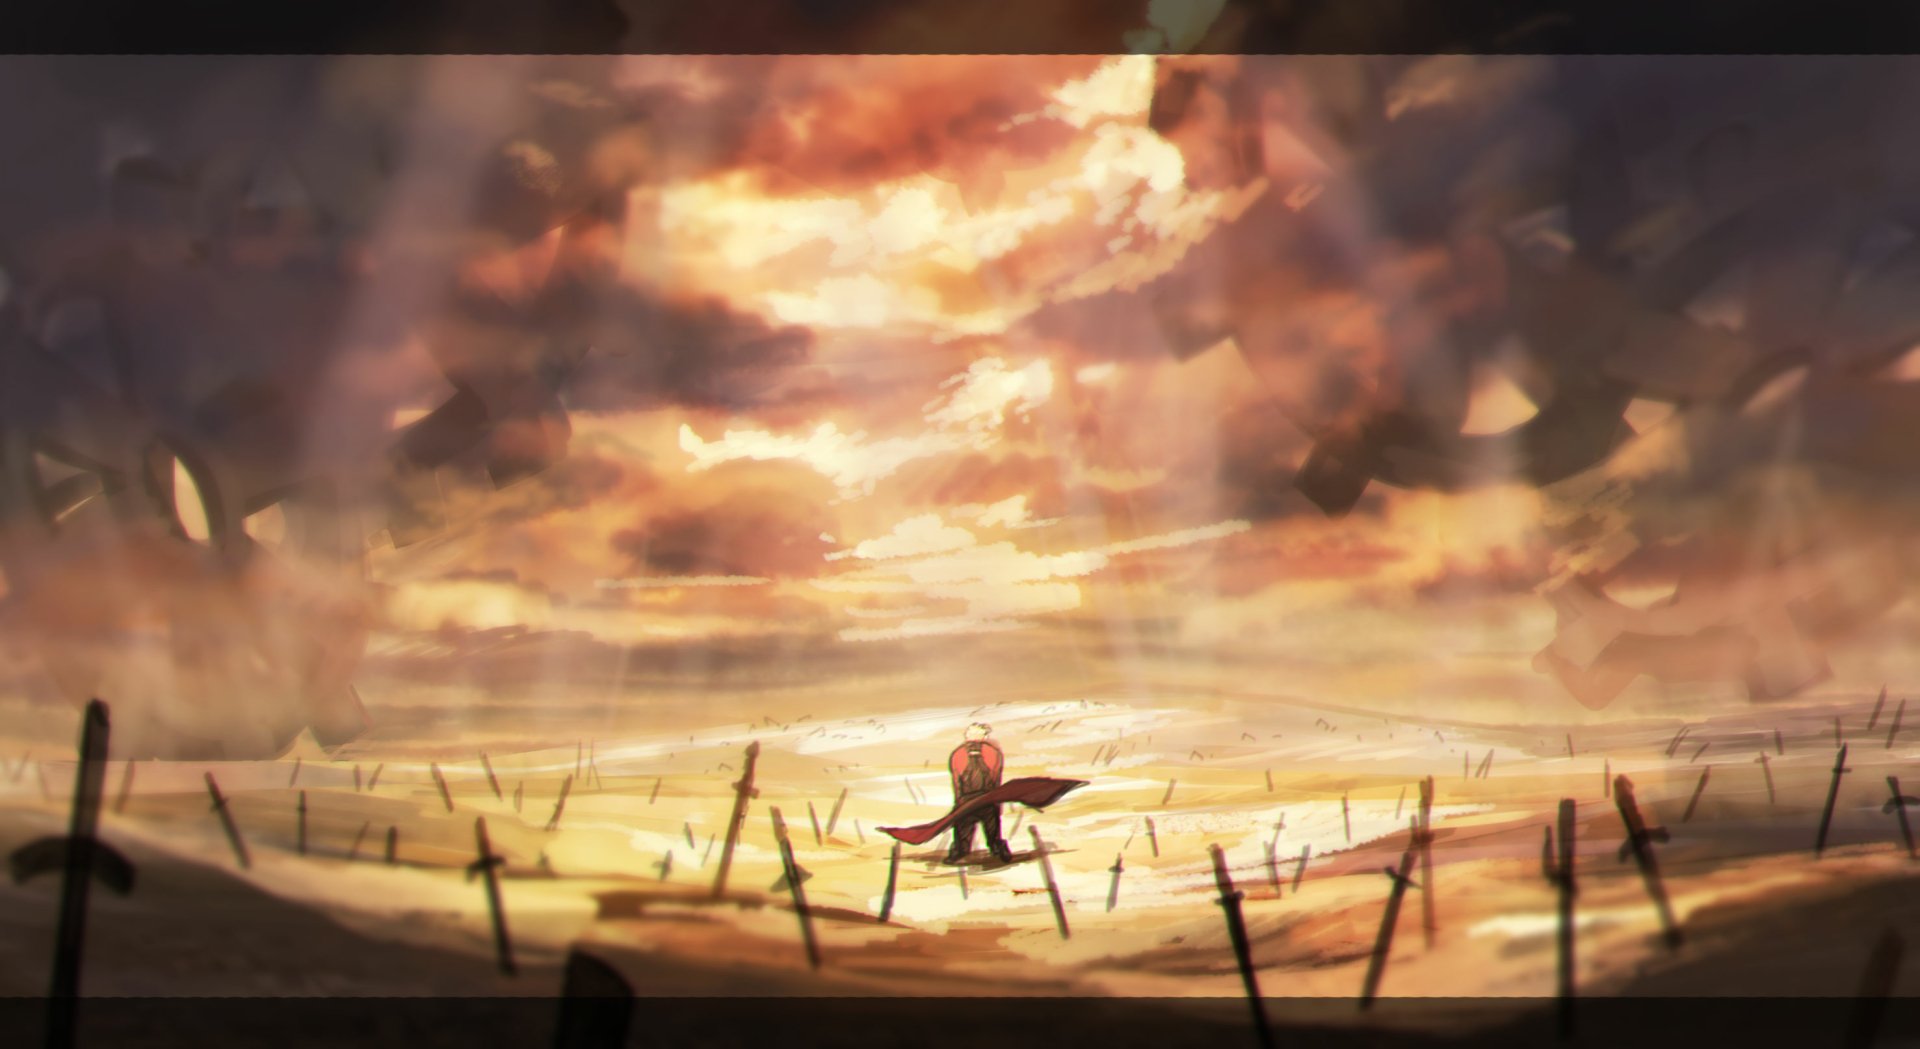 Anime Fatestay Night Unlimited Blade Works Hd Wallpaper By 緜 2823